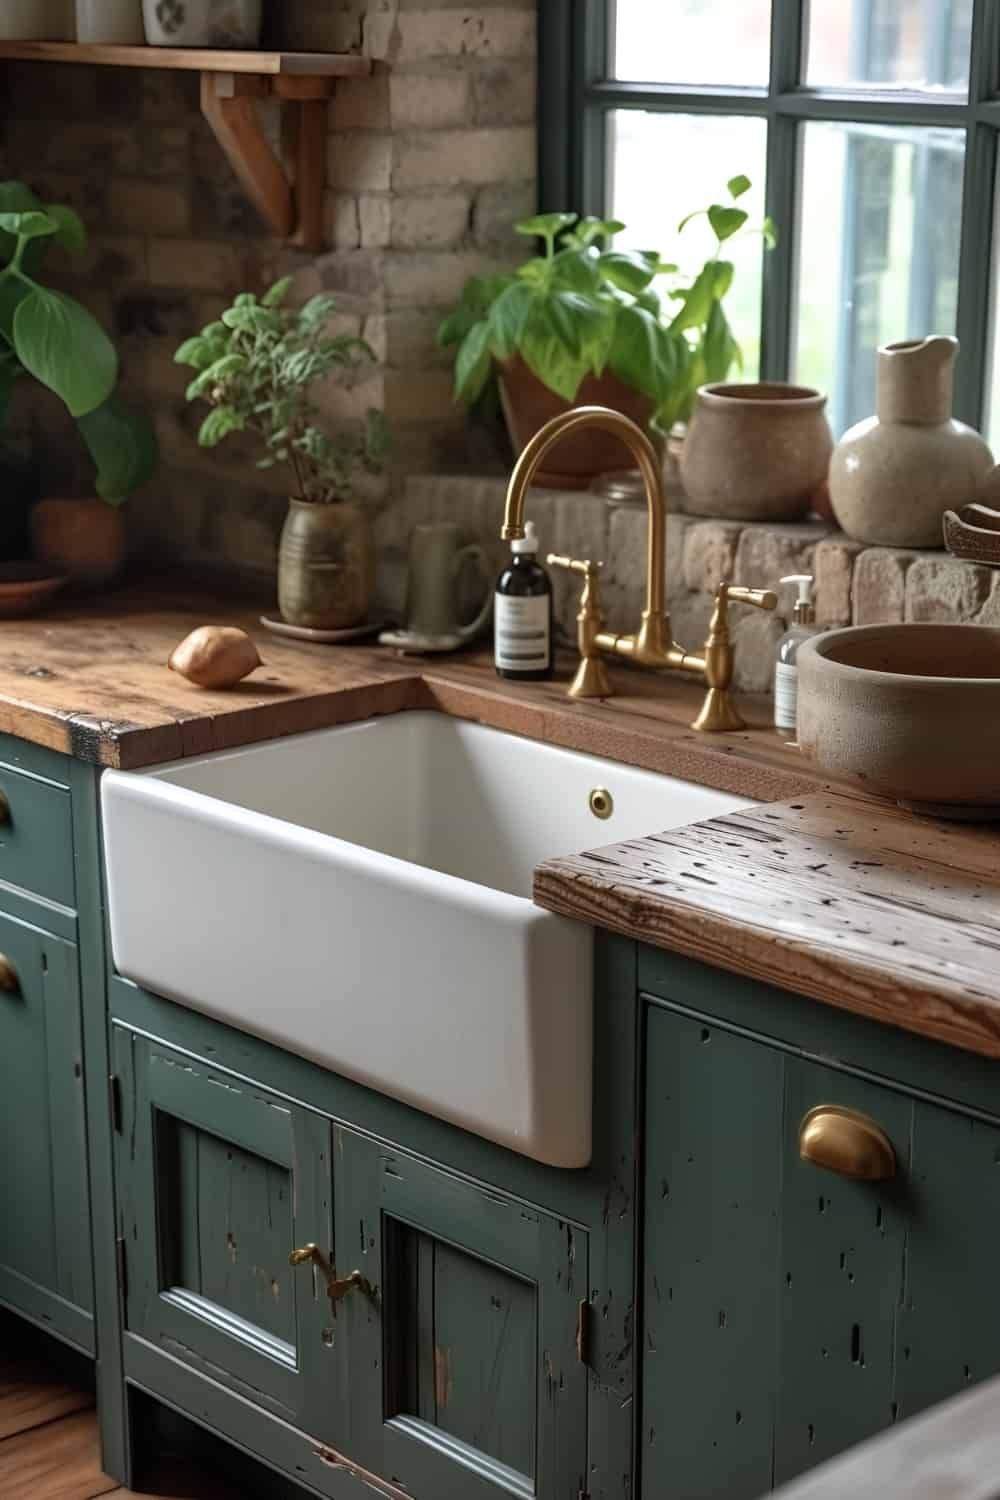 Country Kitchens Warm and Cozy Kitchen Ideas inspired by the Countryside